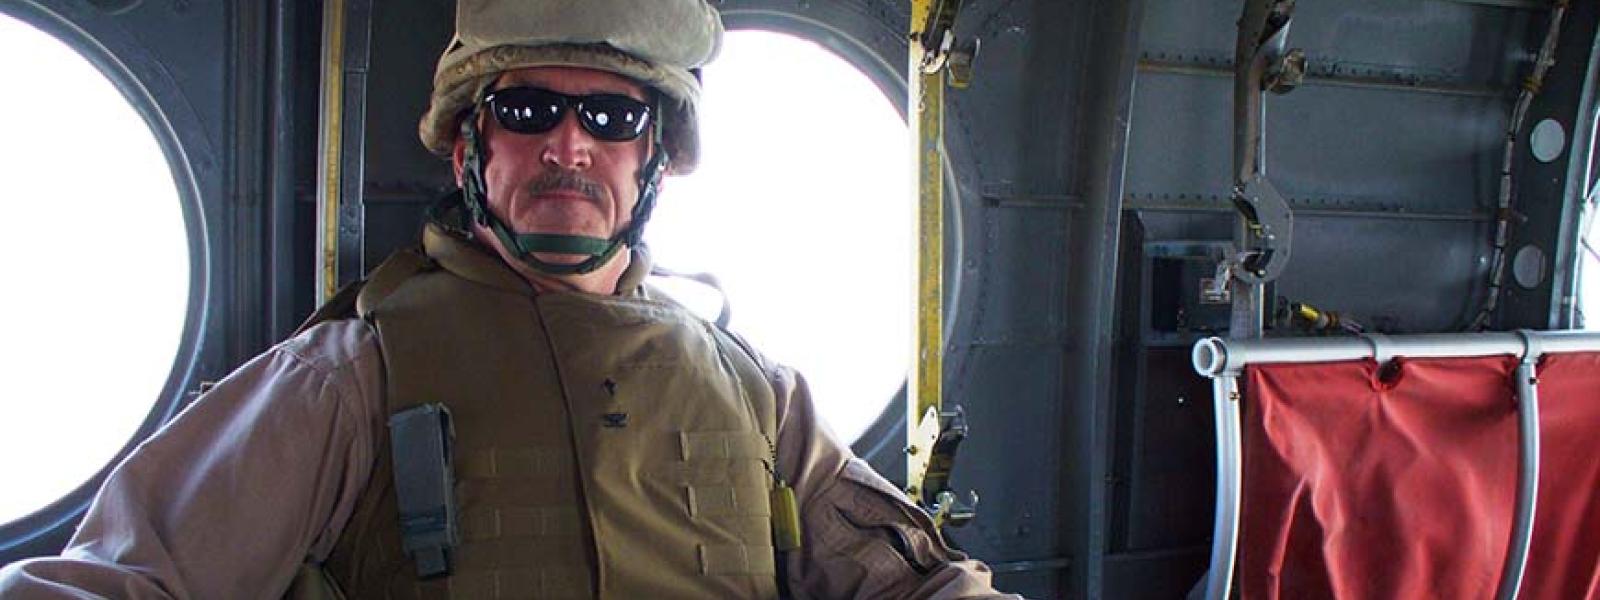 Dr. Mike Langston on board a helicopter serving as a Navy chaplain in Afghanistan.